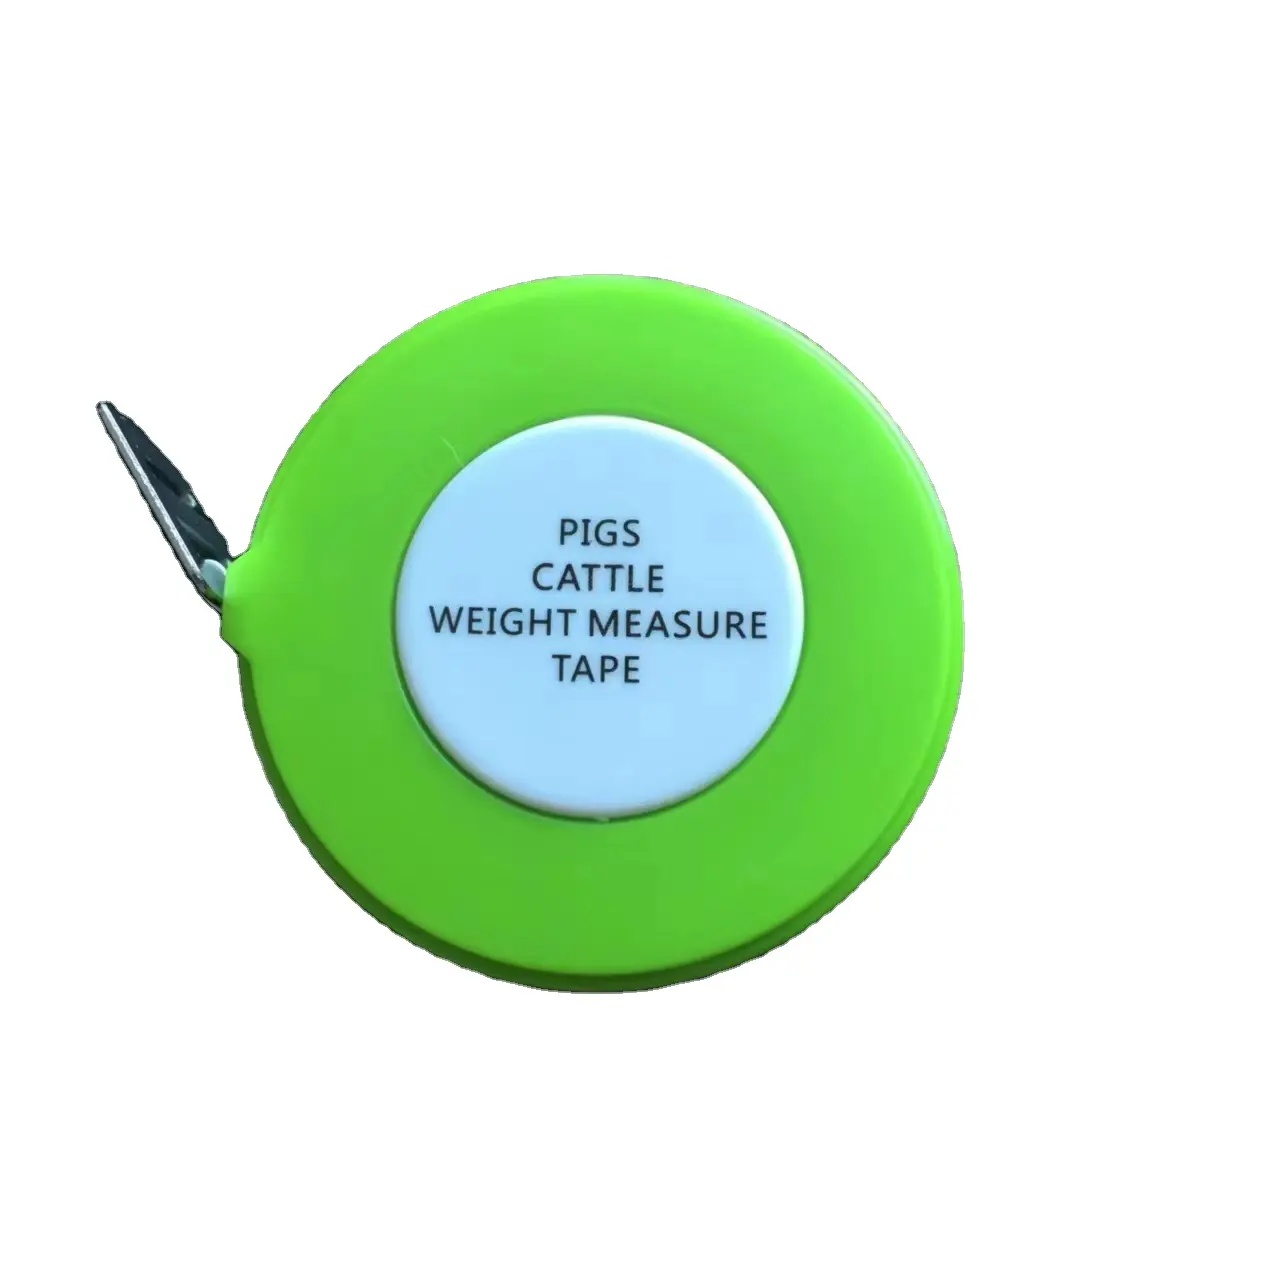 Portable Lightweight And Simple To Use Tape Measure For Measuring Weight Of Pigs Cattle And Sheep Weight Measuring Tape